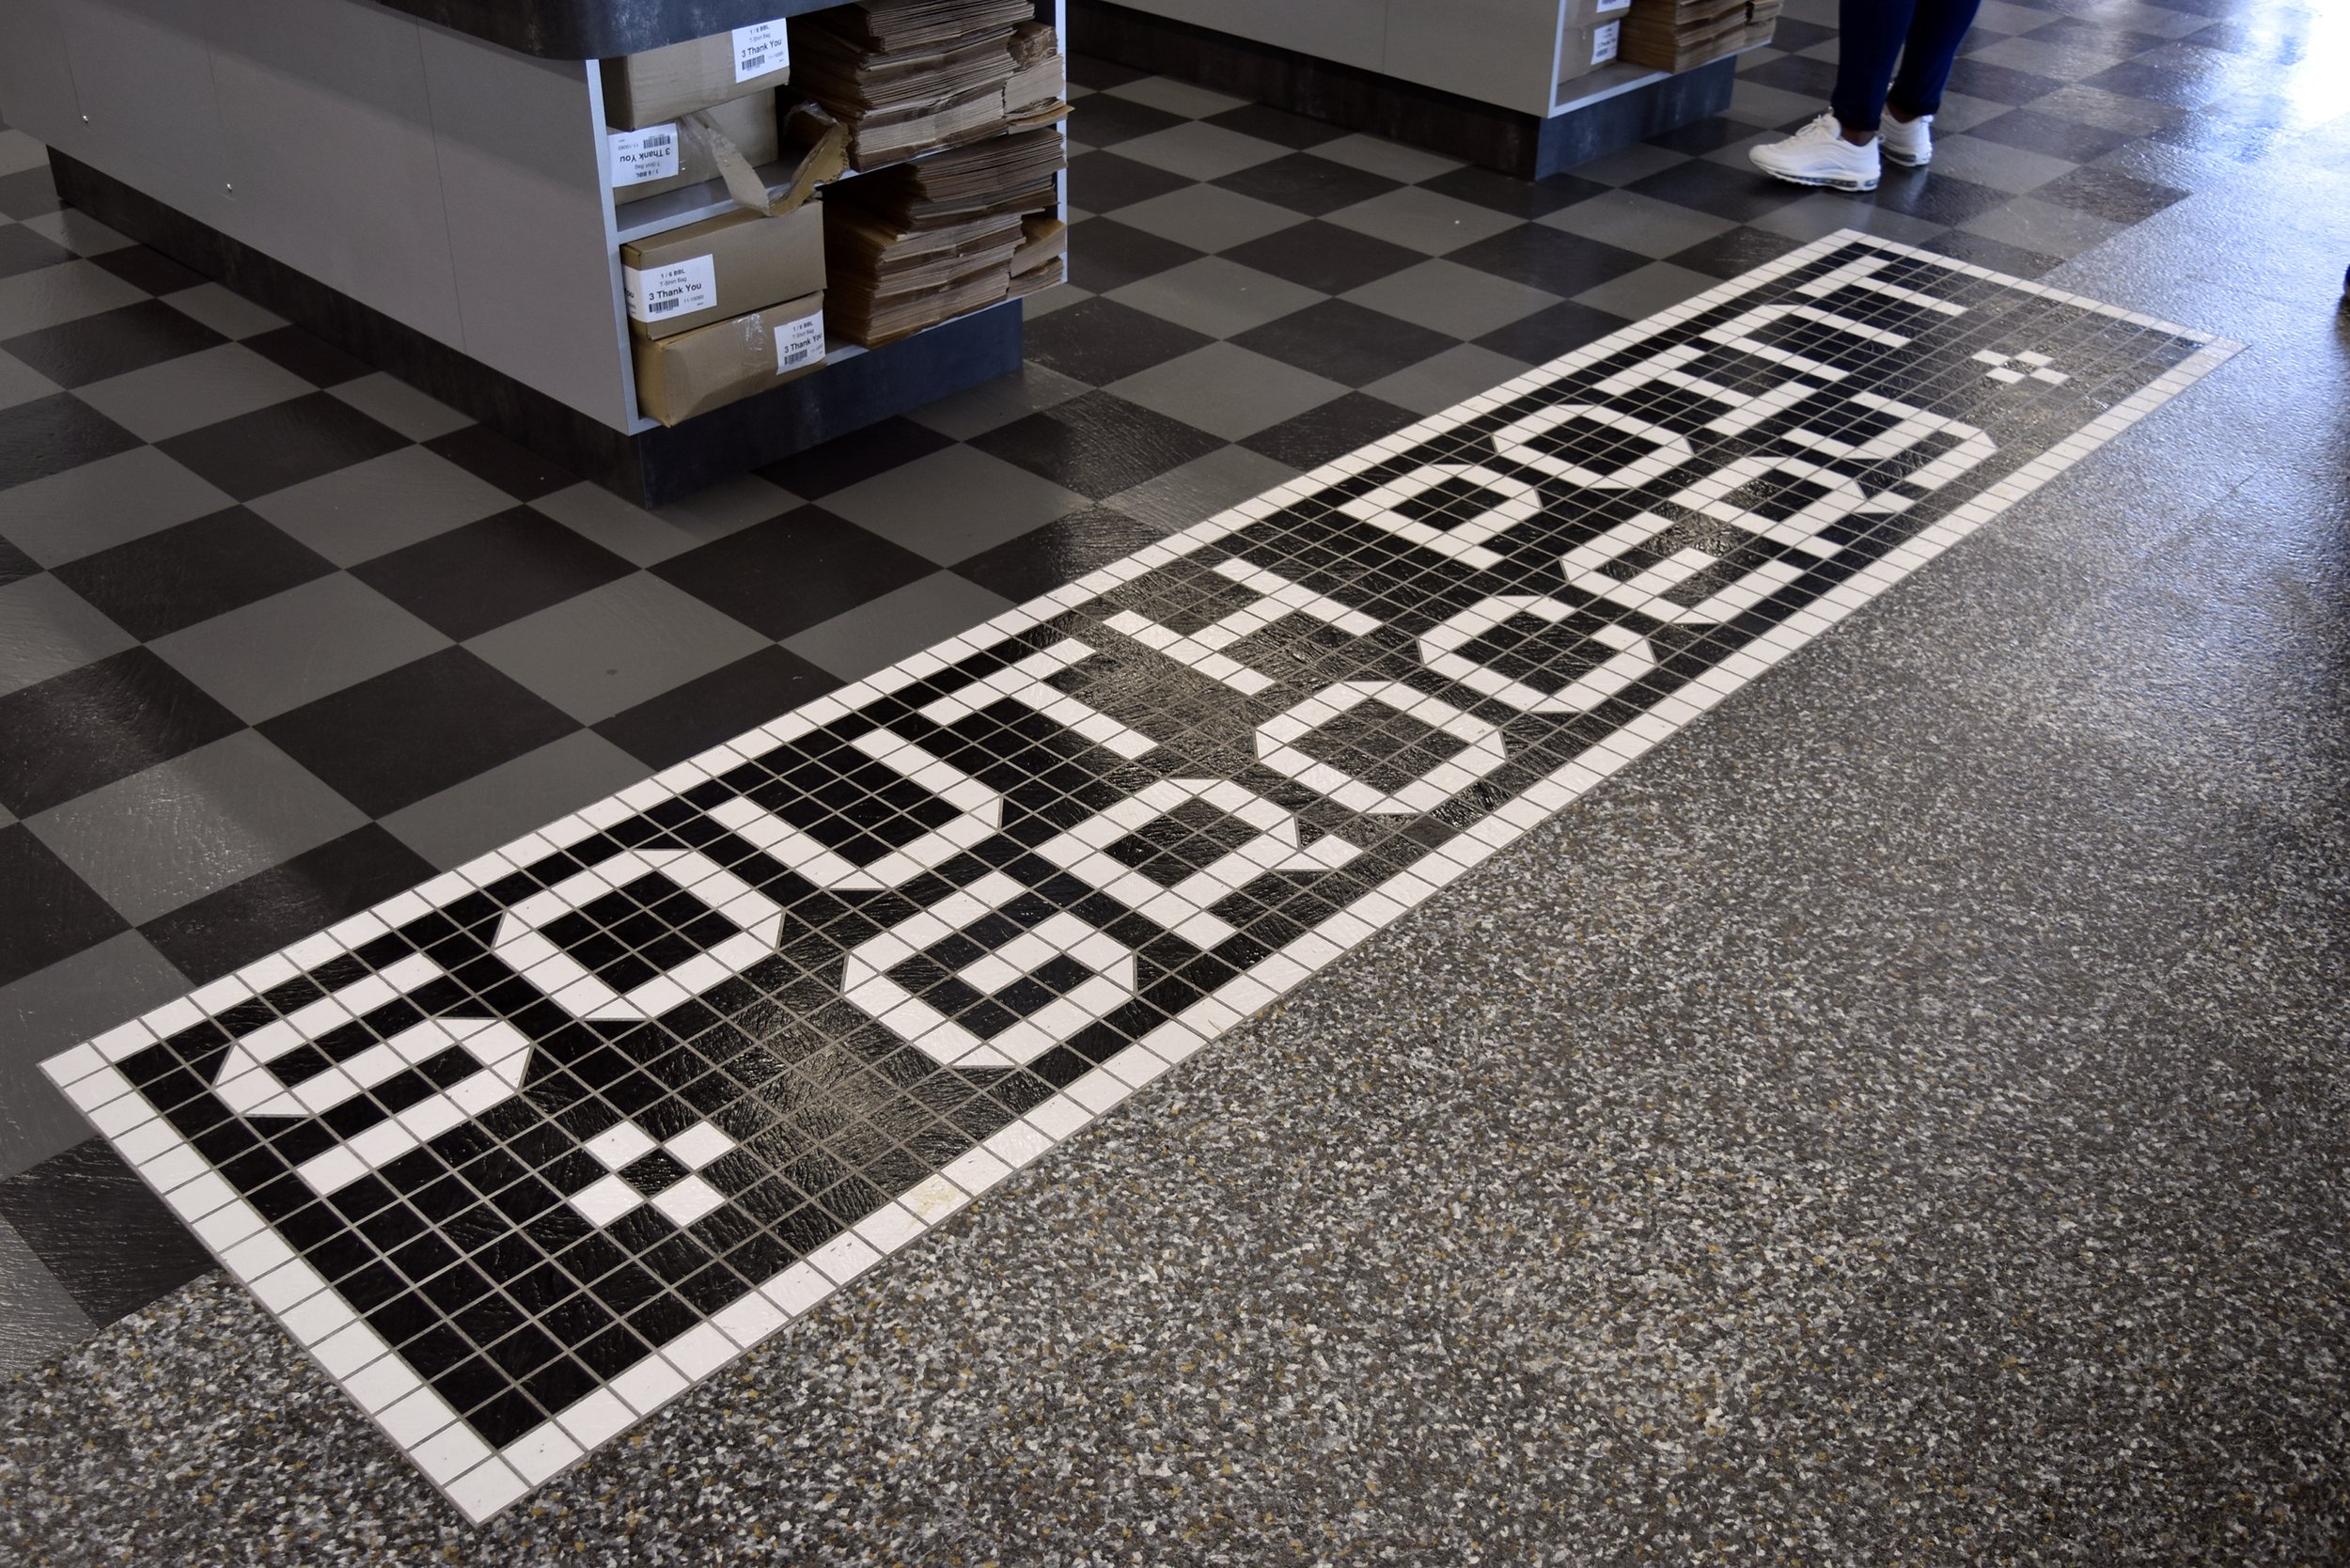  South Point Grocery  Downtown Memphis  South Point Grocery floor logo graphic  Branding creative and floor design by Chuck Mitchell  Logo font design by Chuck Mitchell and Whitt Mitchell  Floor fabrication by Tarkett  Floor installation by Joy Floor